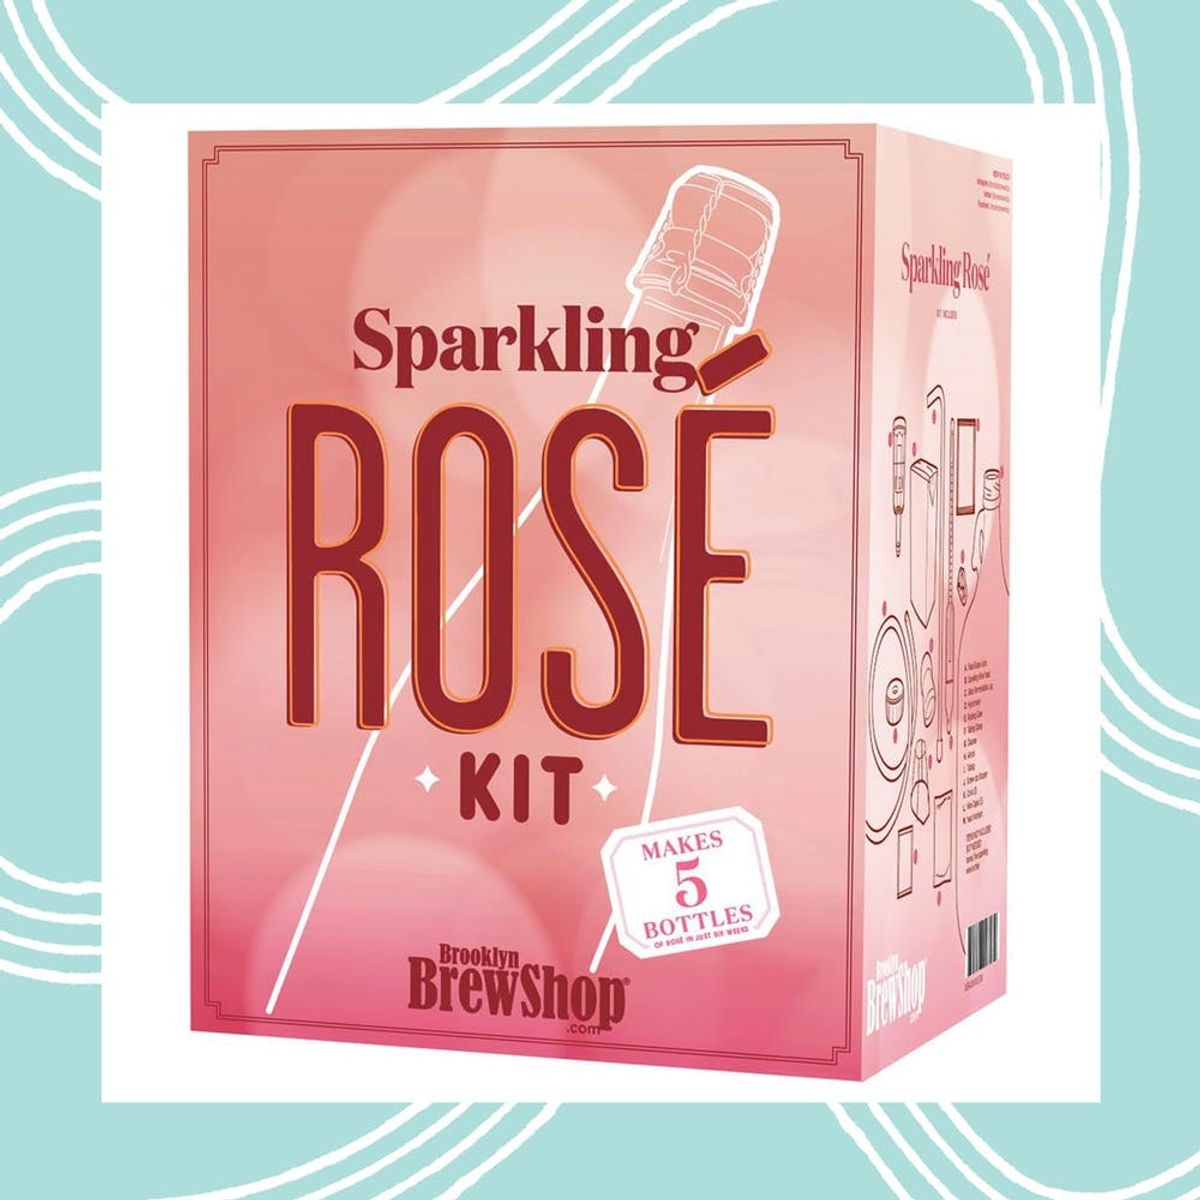 You Can Now Legitimately Brew Sparkling Rosé at Home Thanks to This Kit